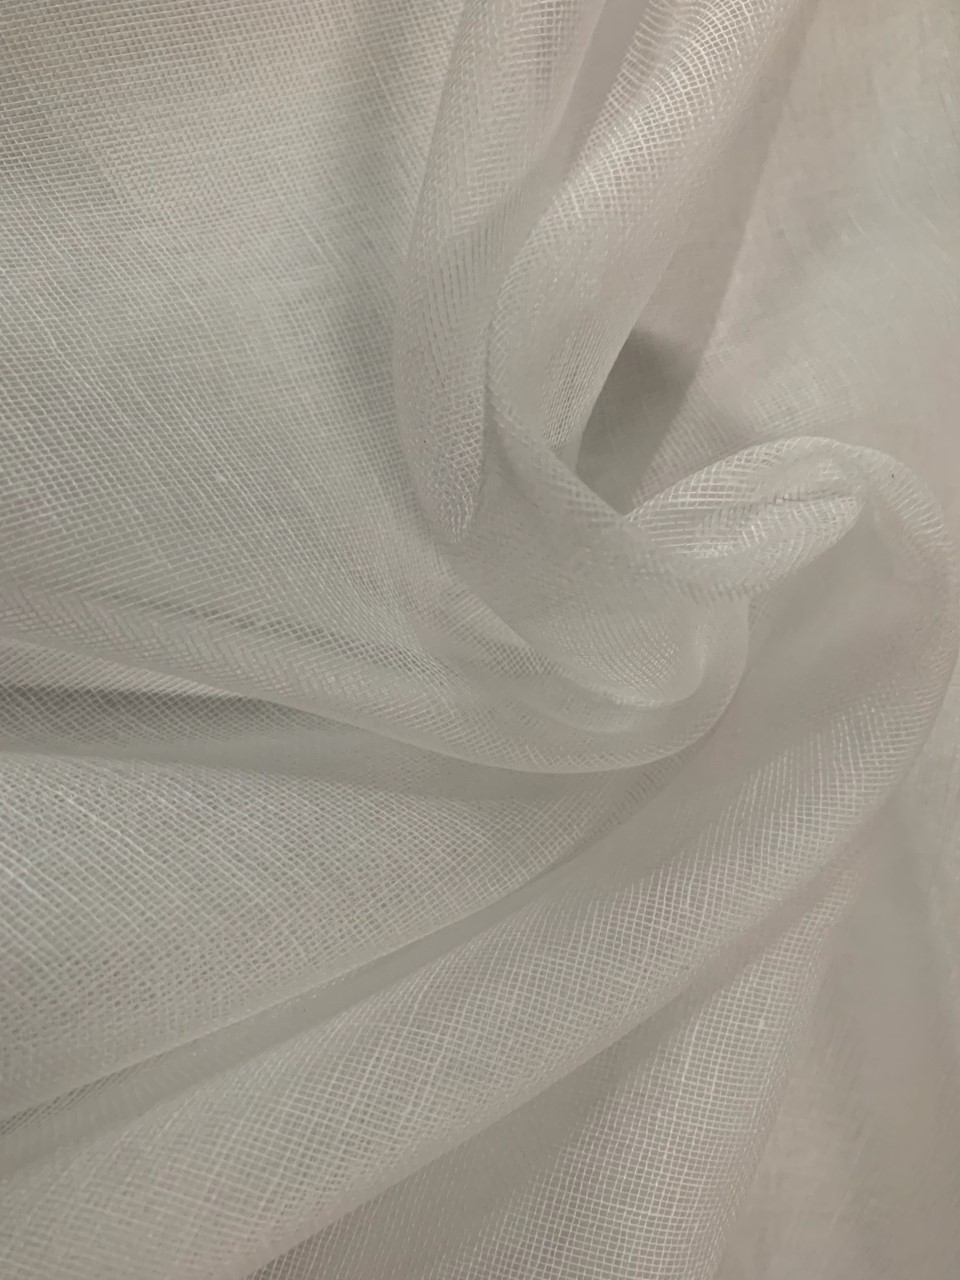 Grade 60 Cheesecloth 100 Yard Roll 36" Wide (Bleached)